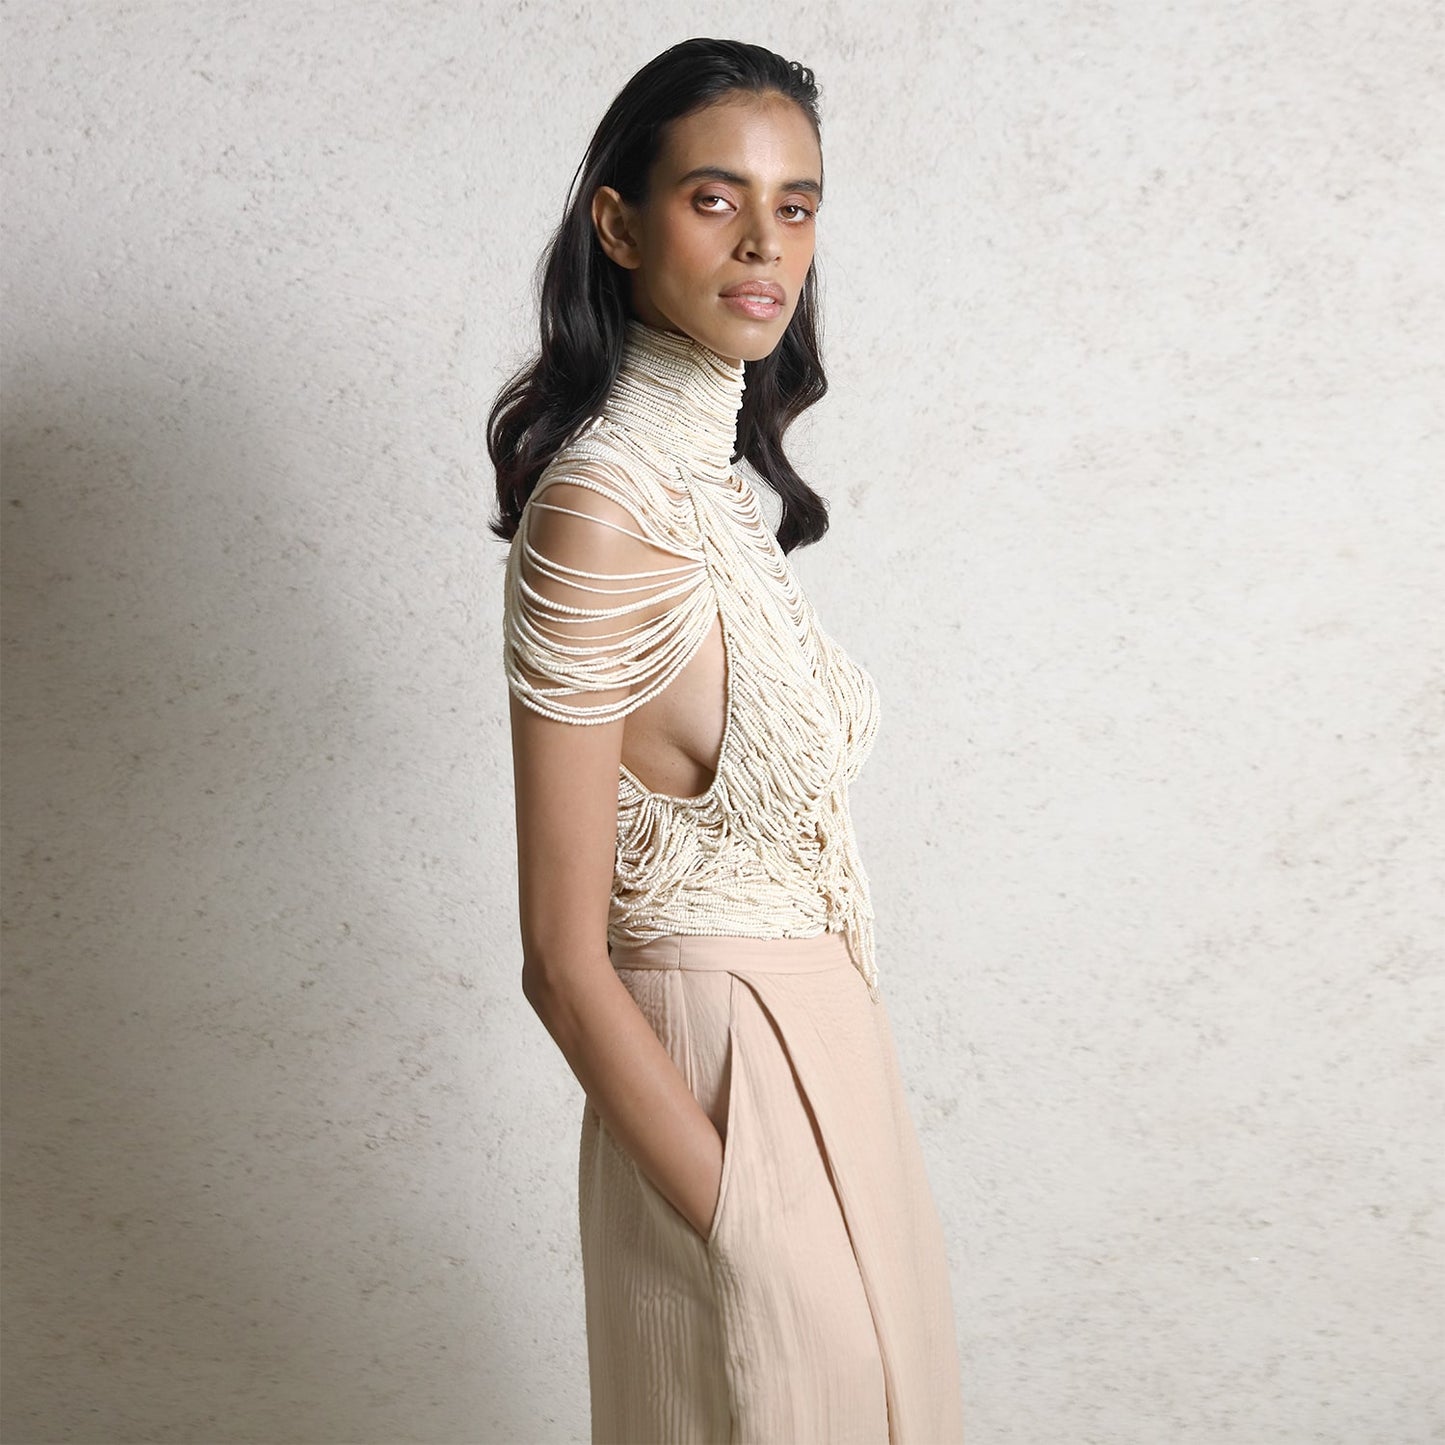 Draped pearl string top with high waisted pants